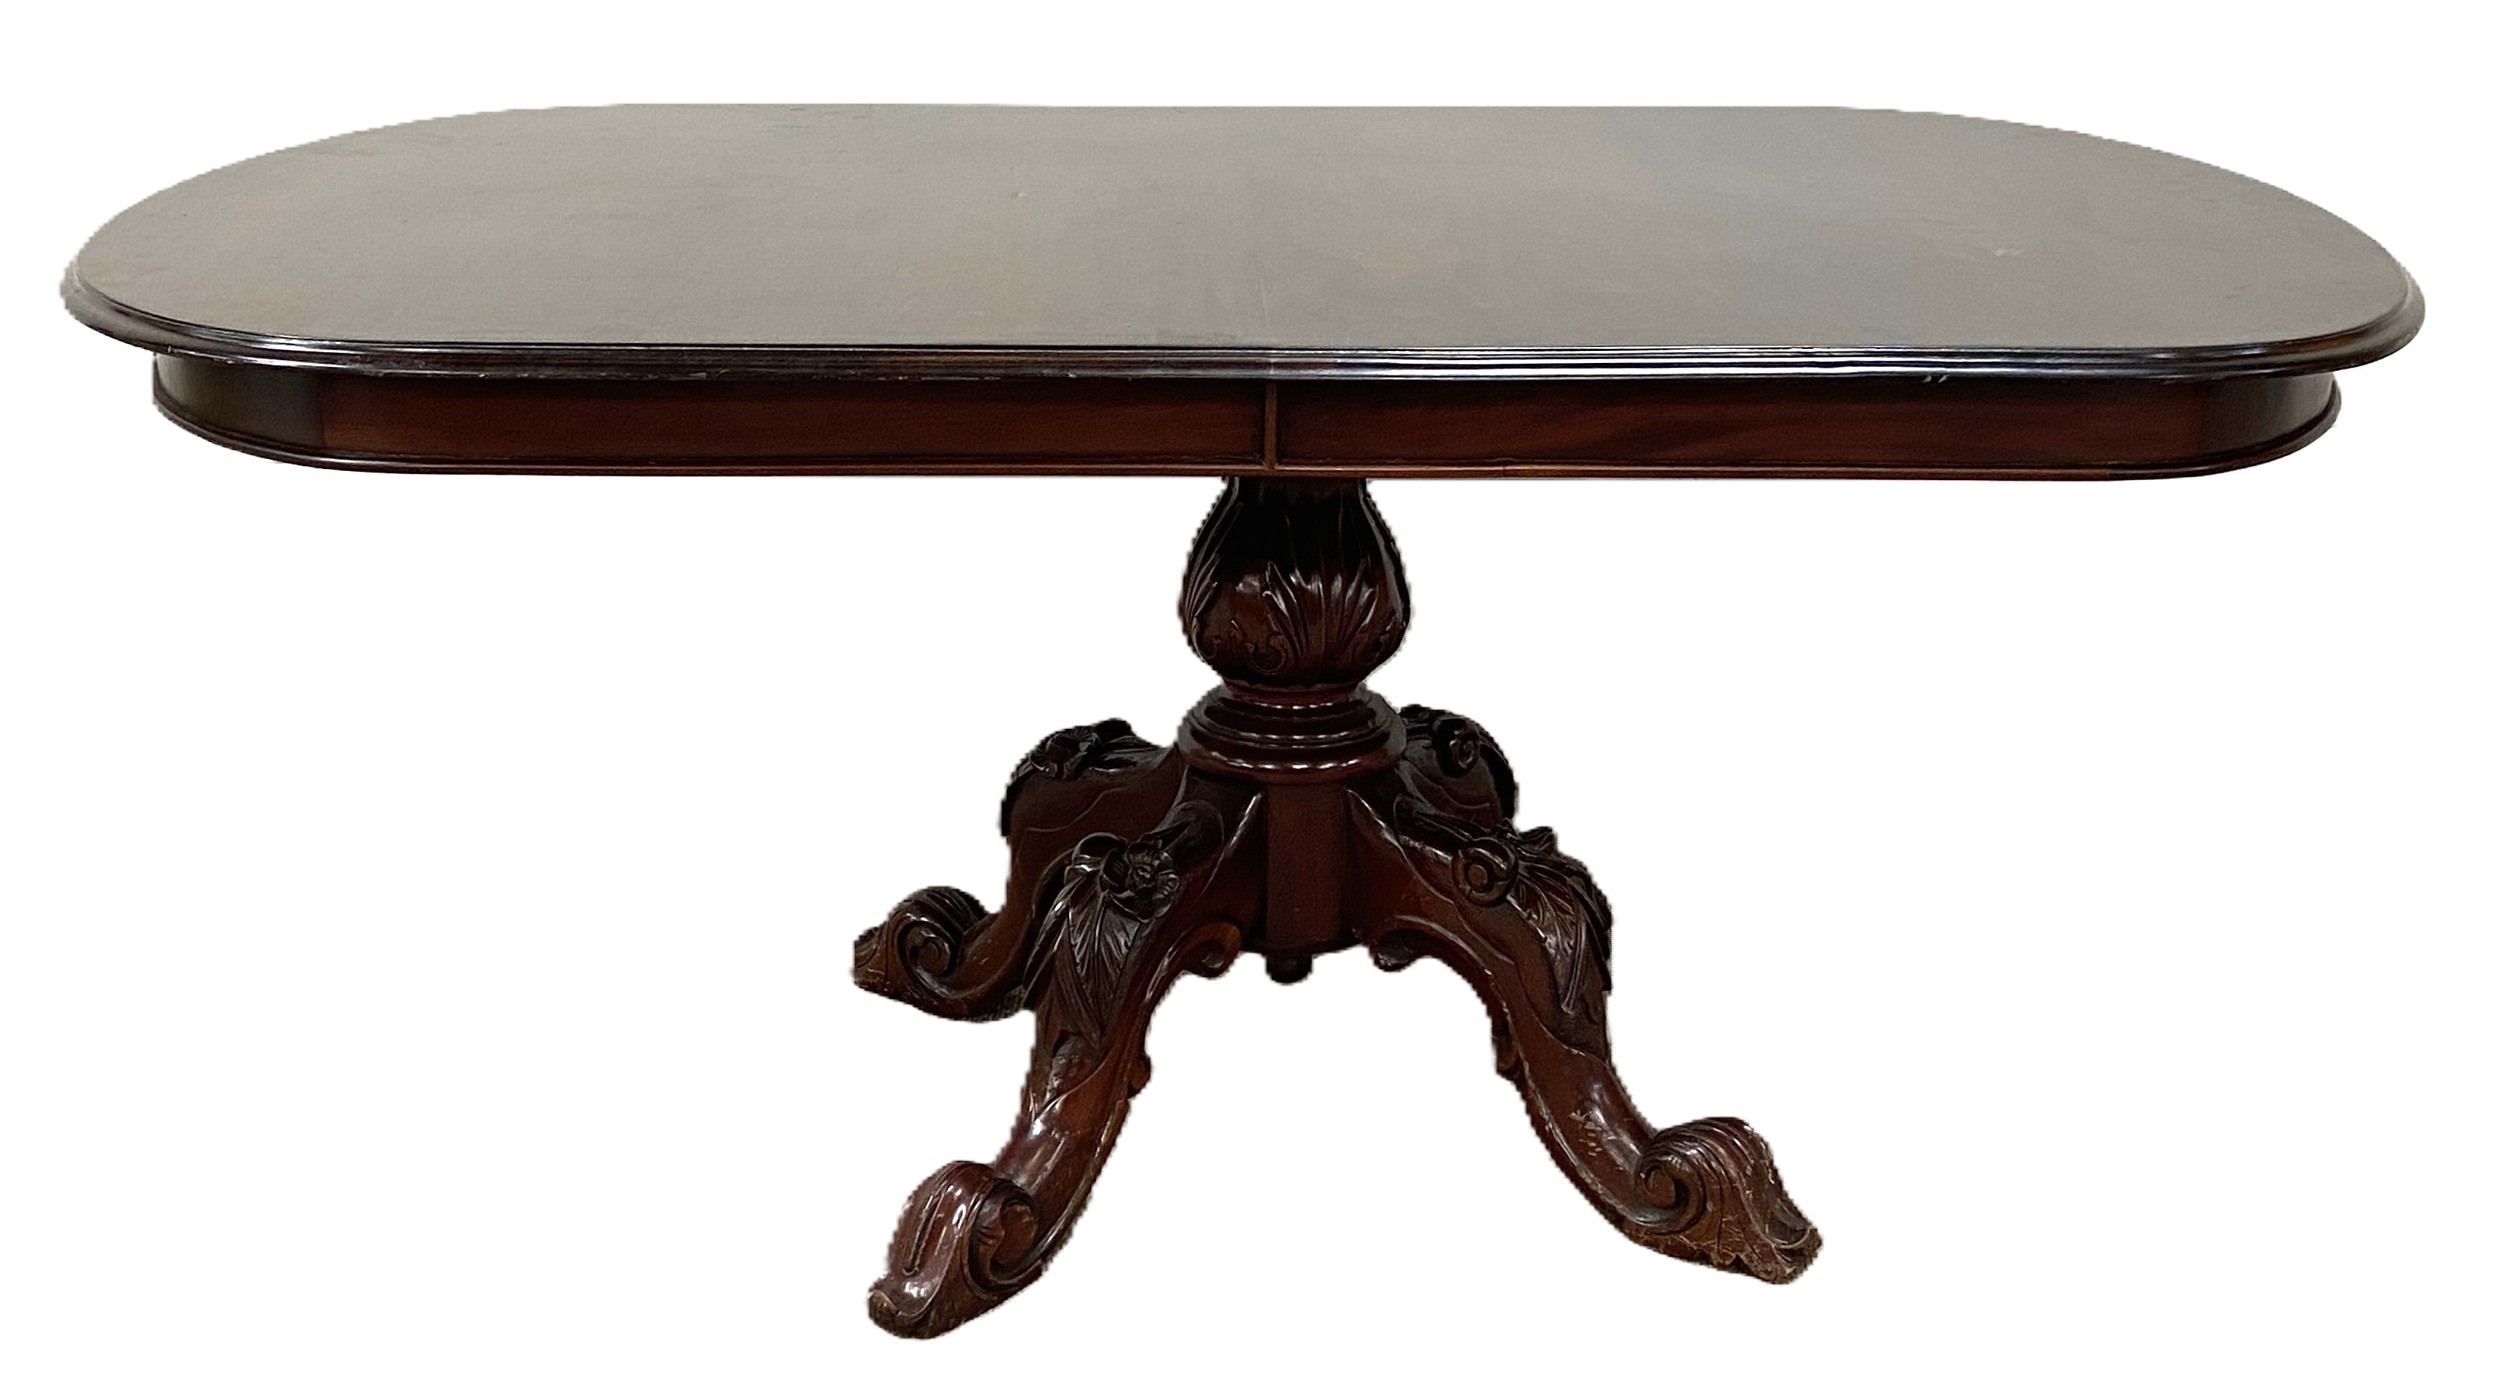 A Victorian style mahogany breakfast table, 20th century, with an oval top on a leaf capped baluster